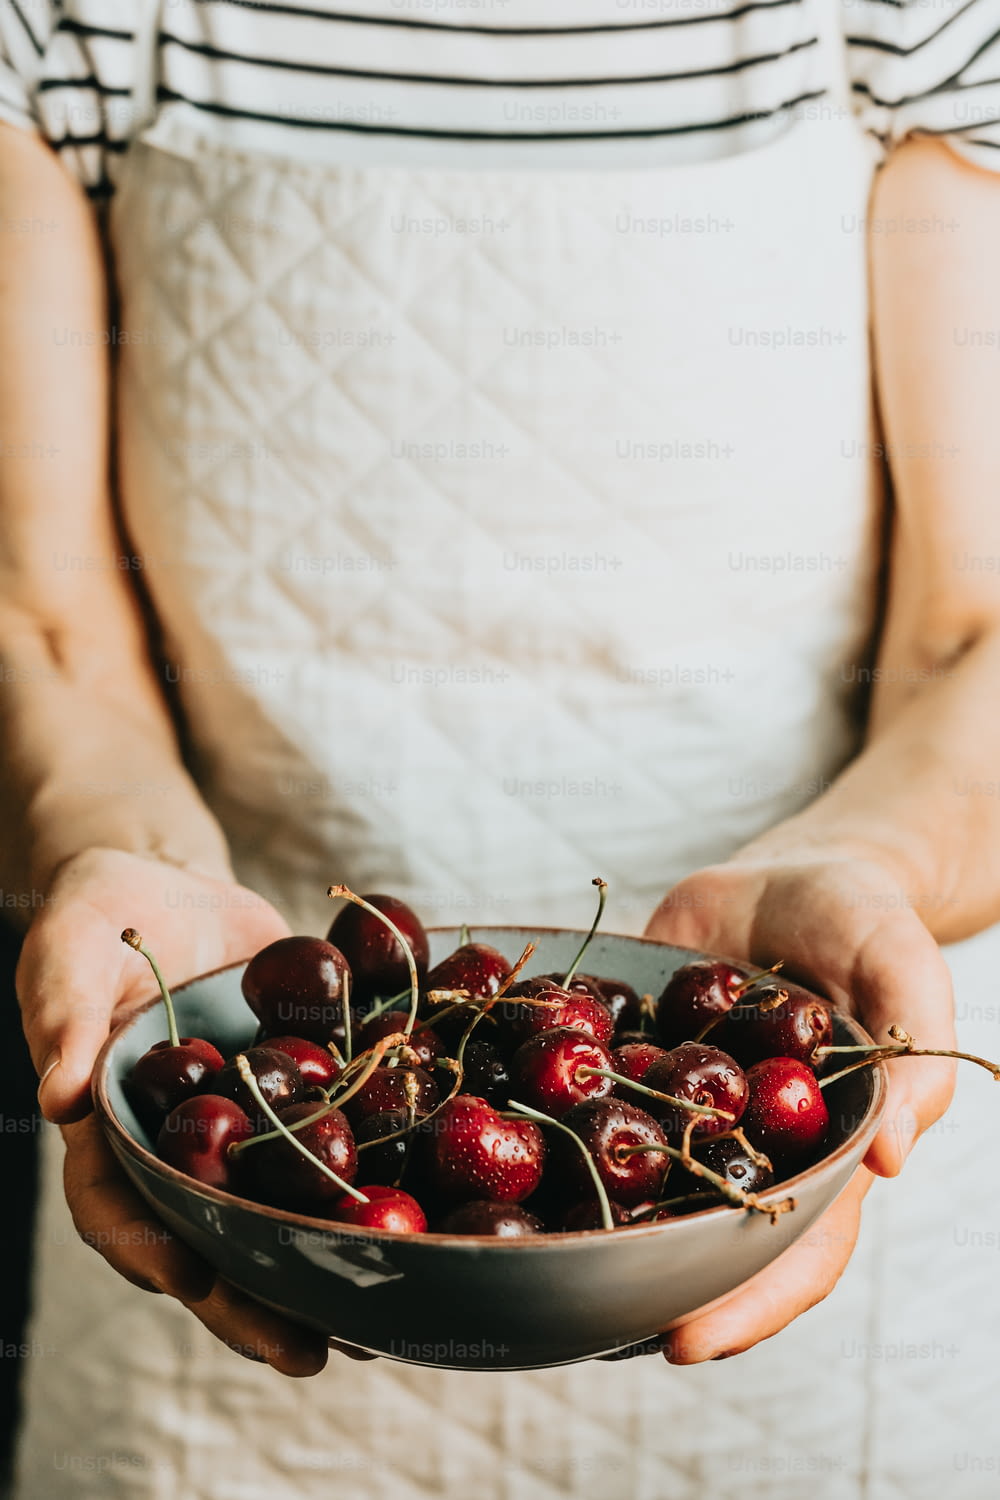 a person holding a bowl of cherries in their hands